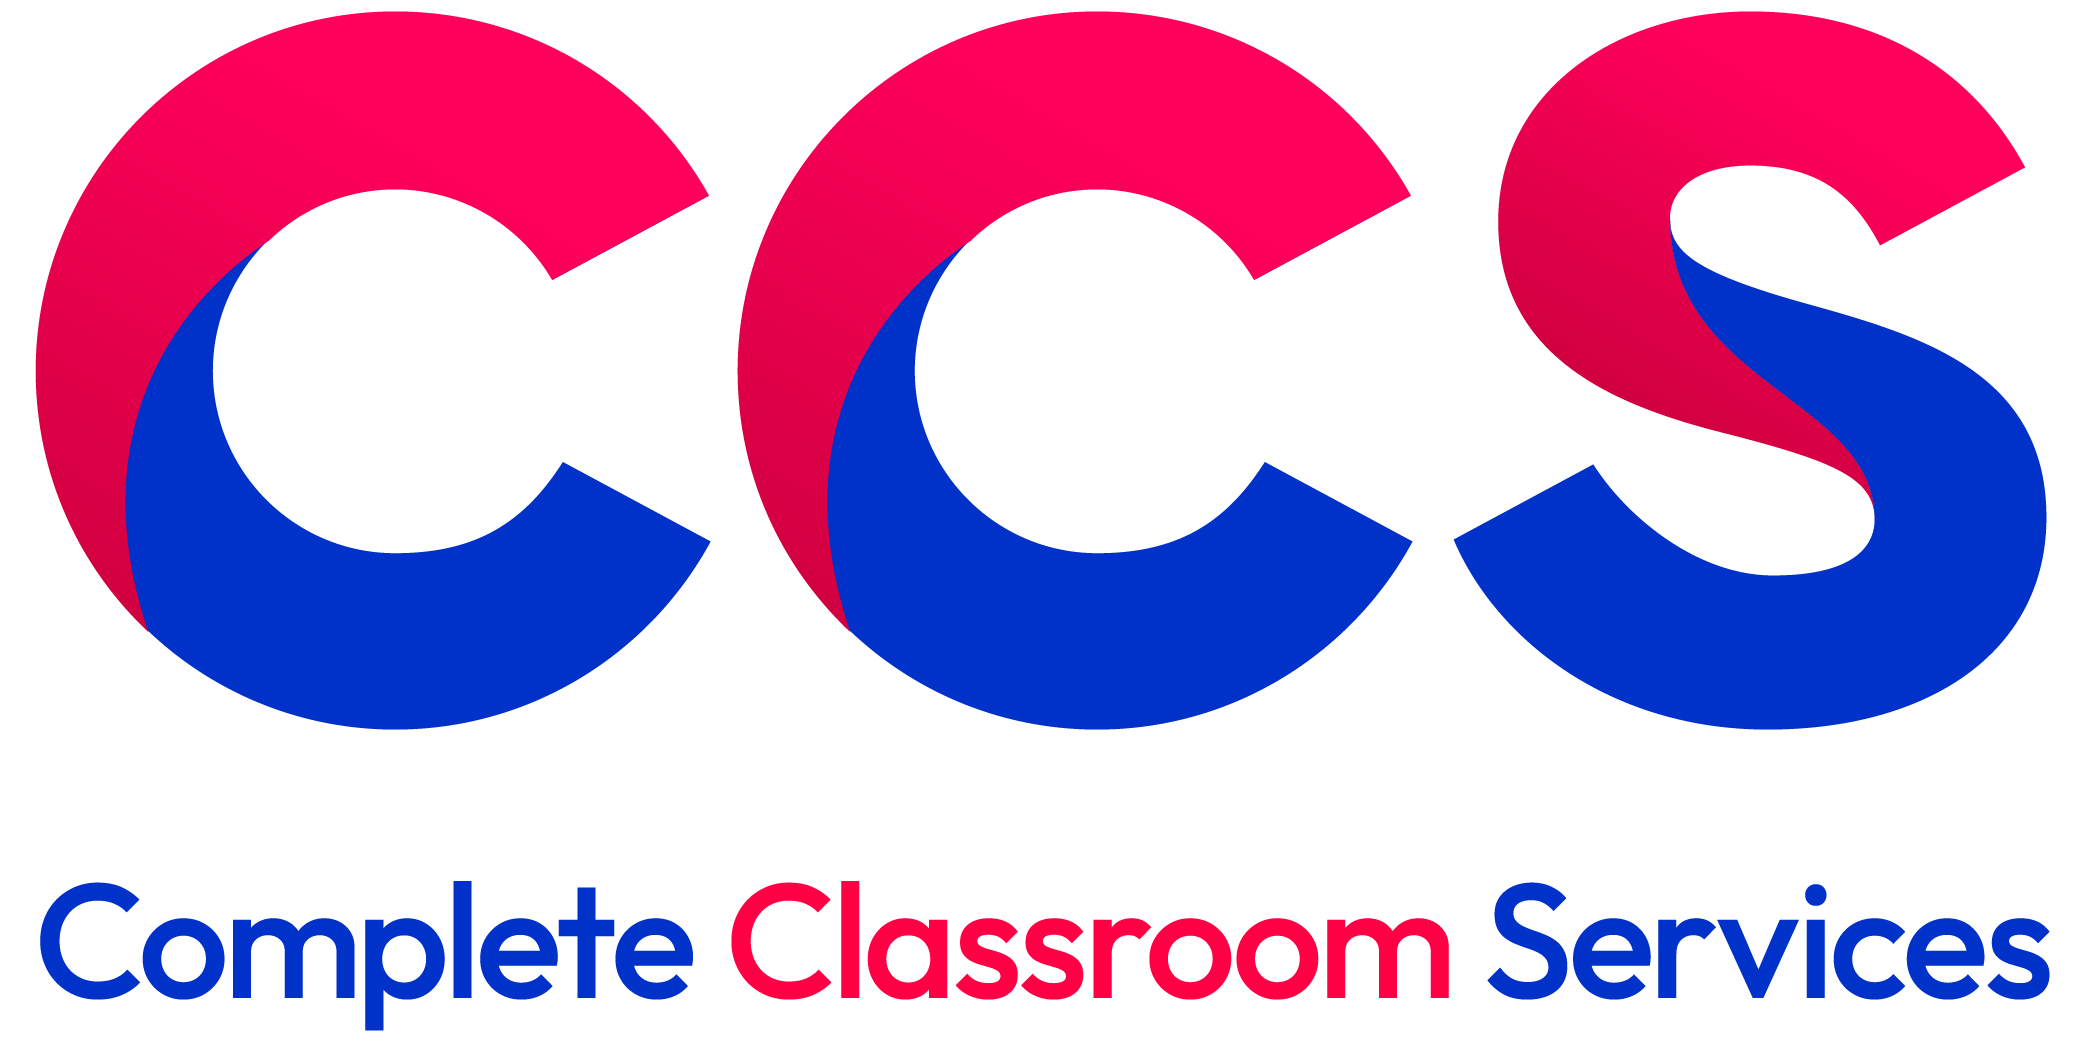 Complete Classroom Services